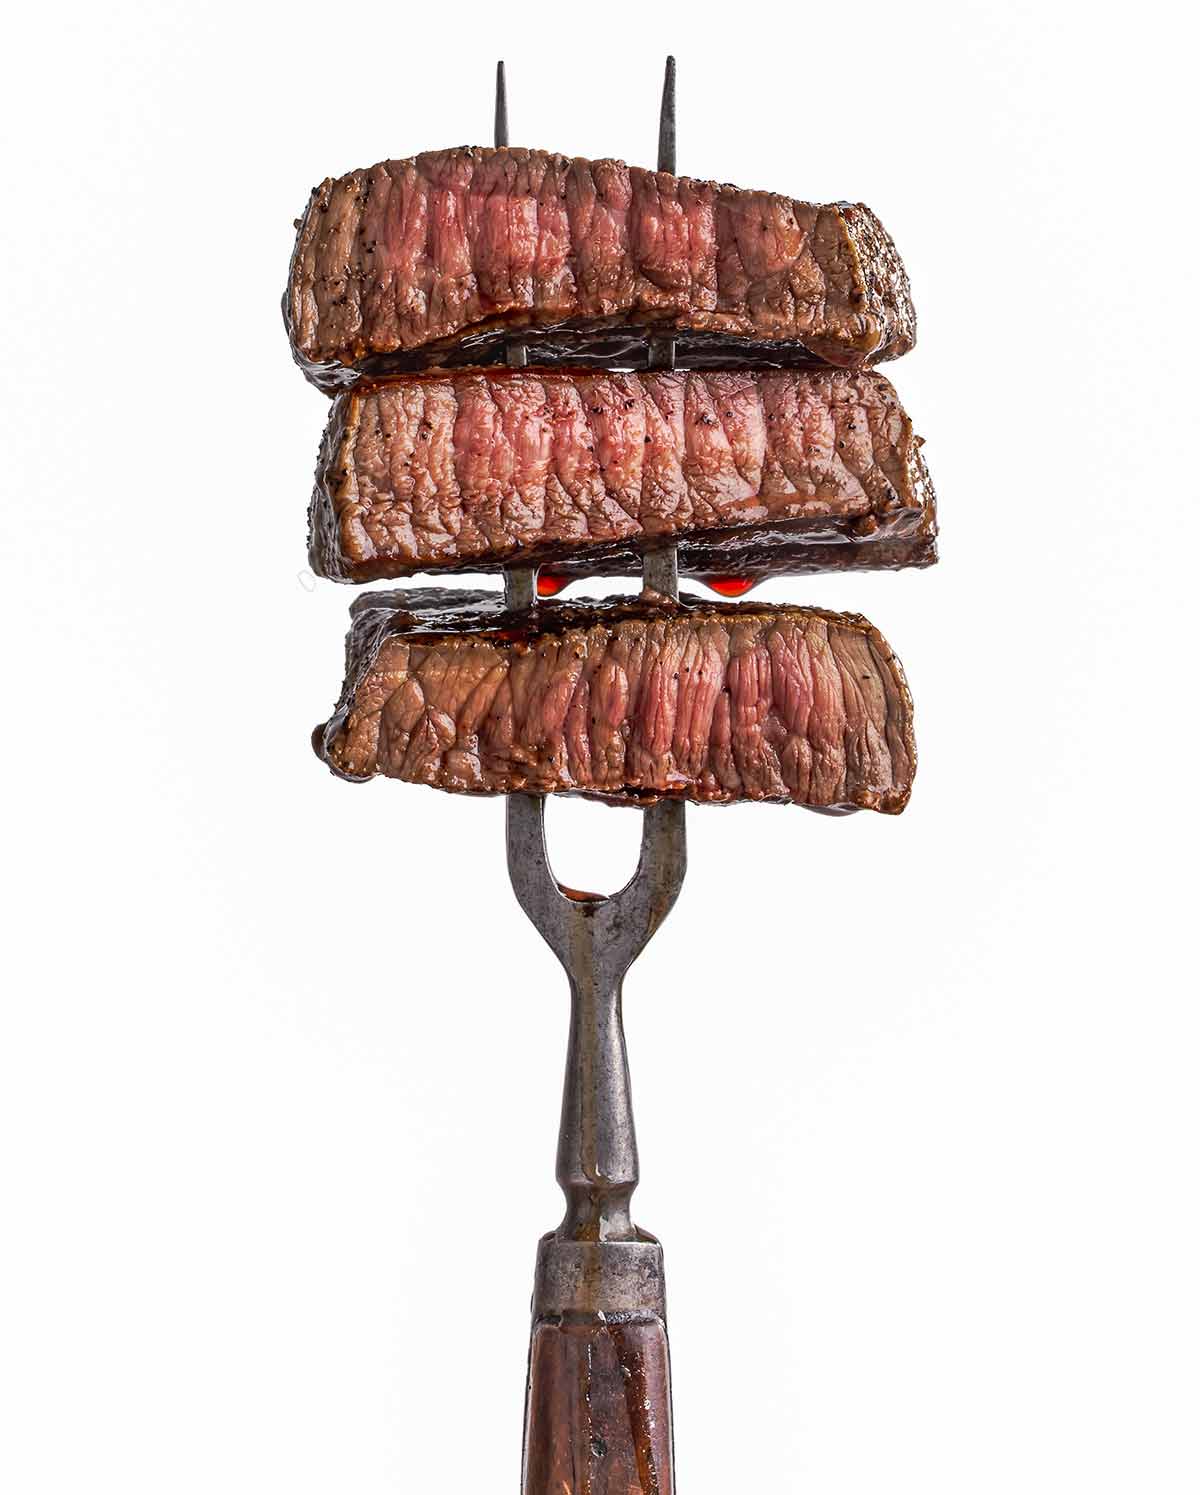 A two-pronged fork with 3 slices of perfectly cooked steak on it.